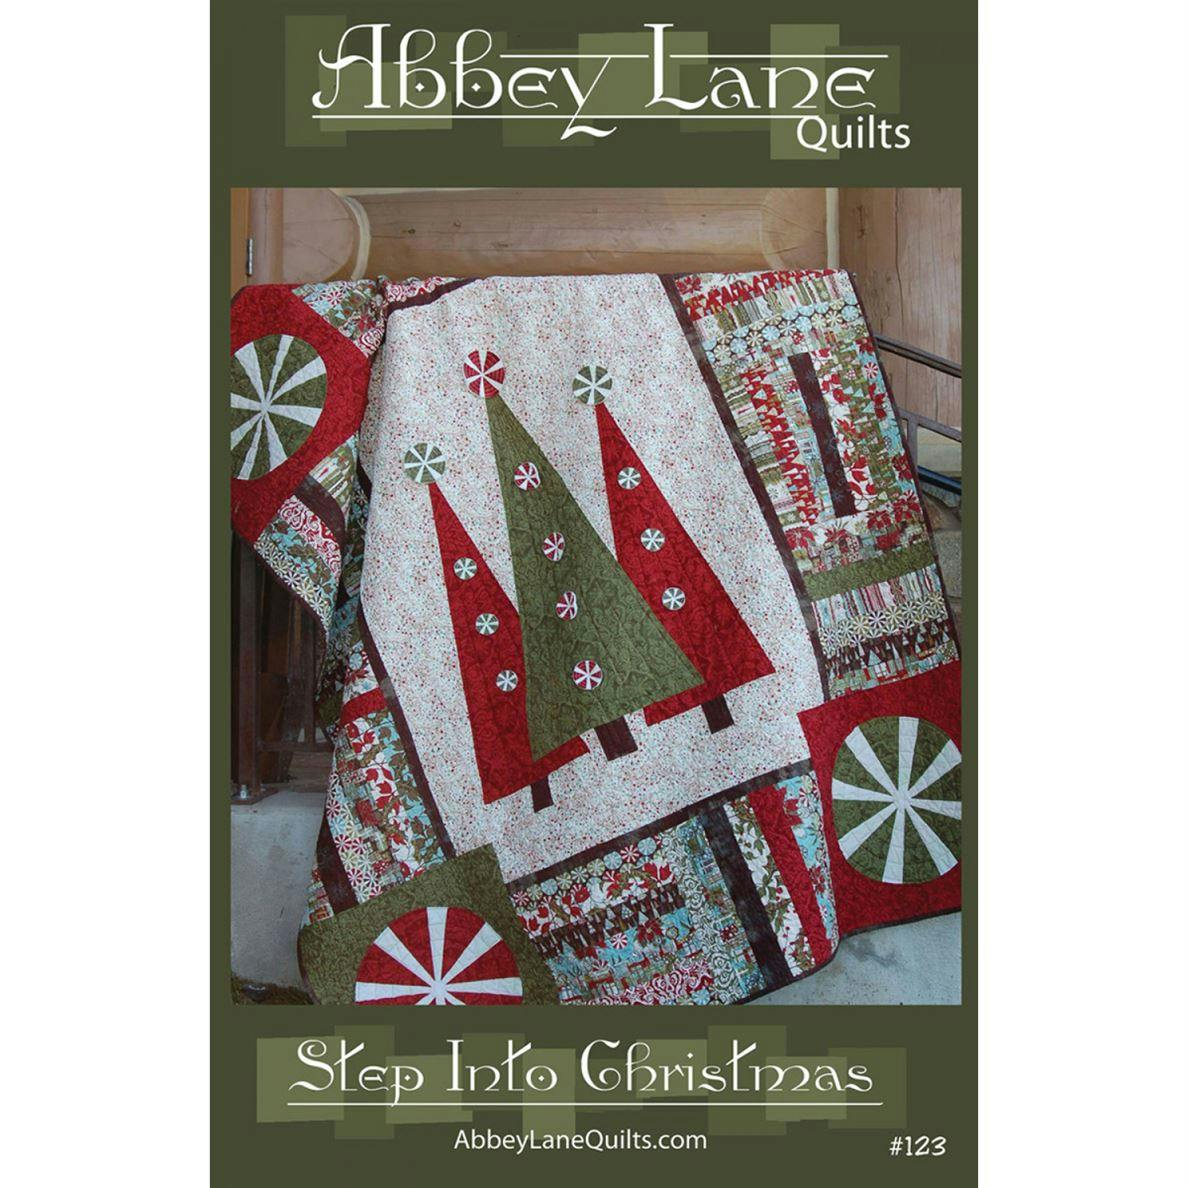 Step Into Christmas pattern